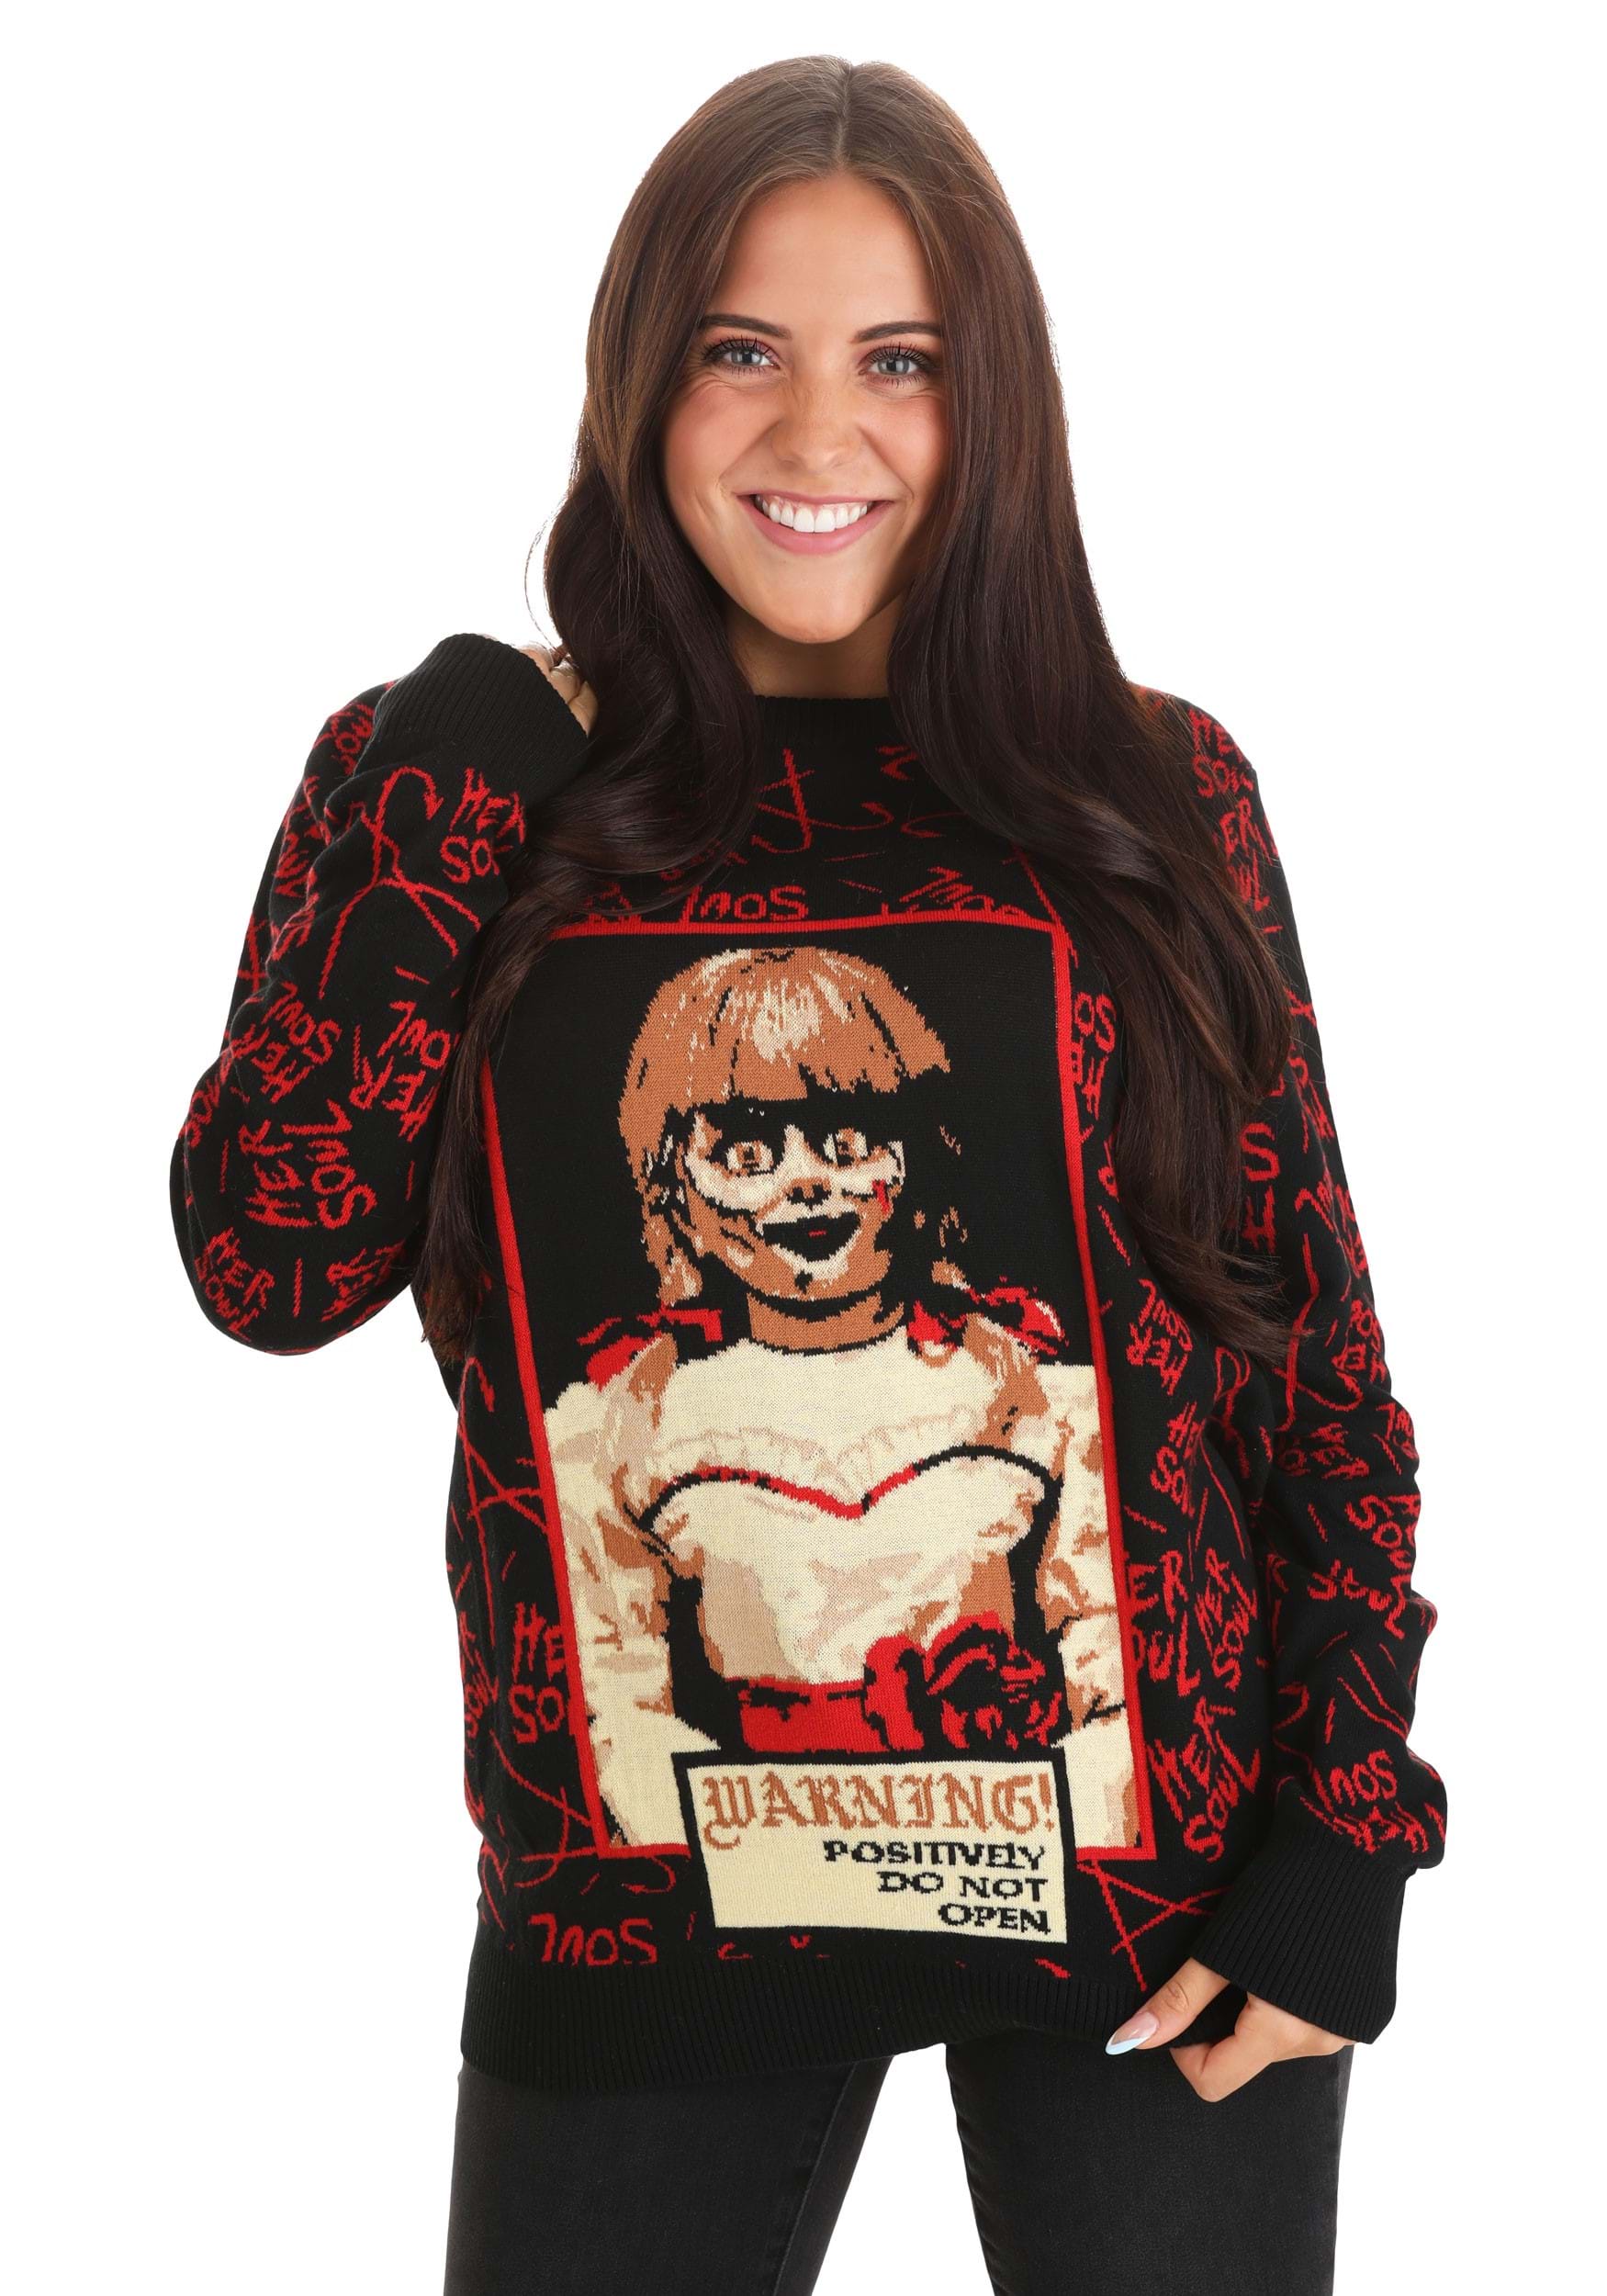 Annabelle Adult Halloween Sweater , Ugly Halloween Sweaters